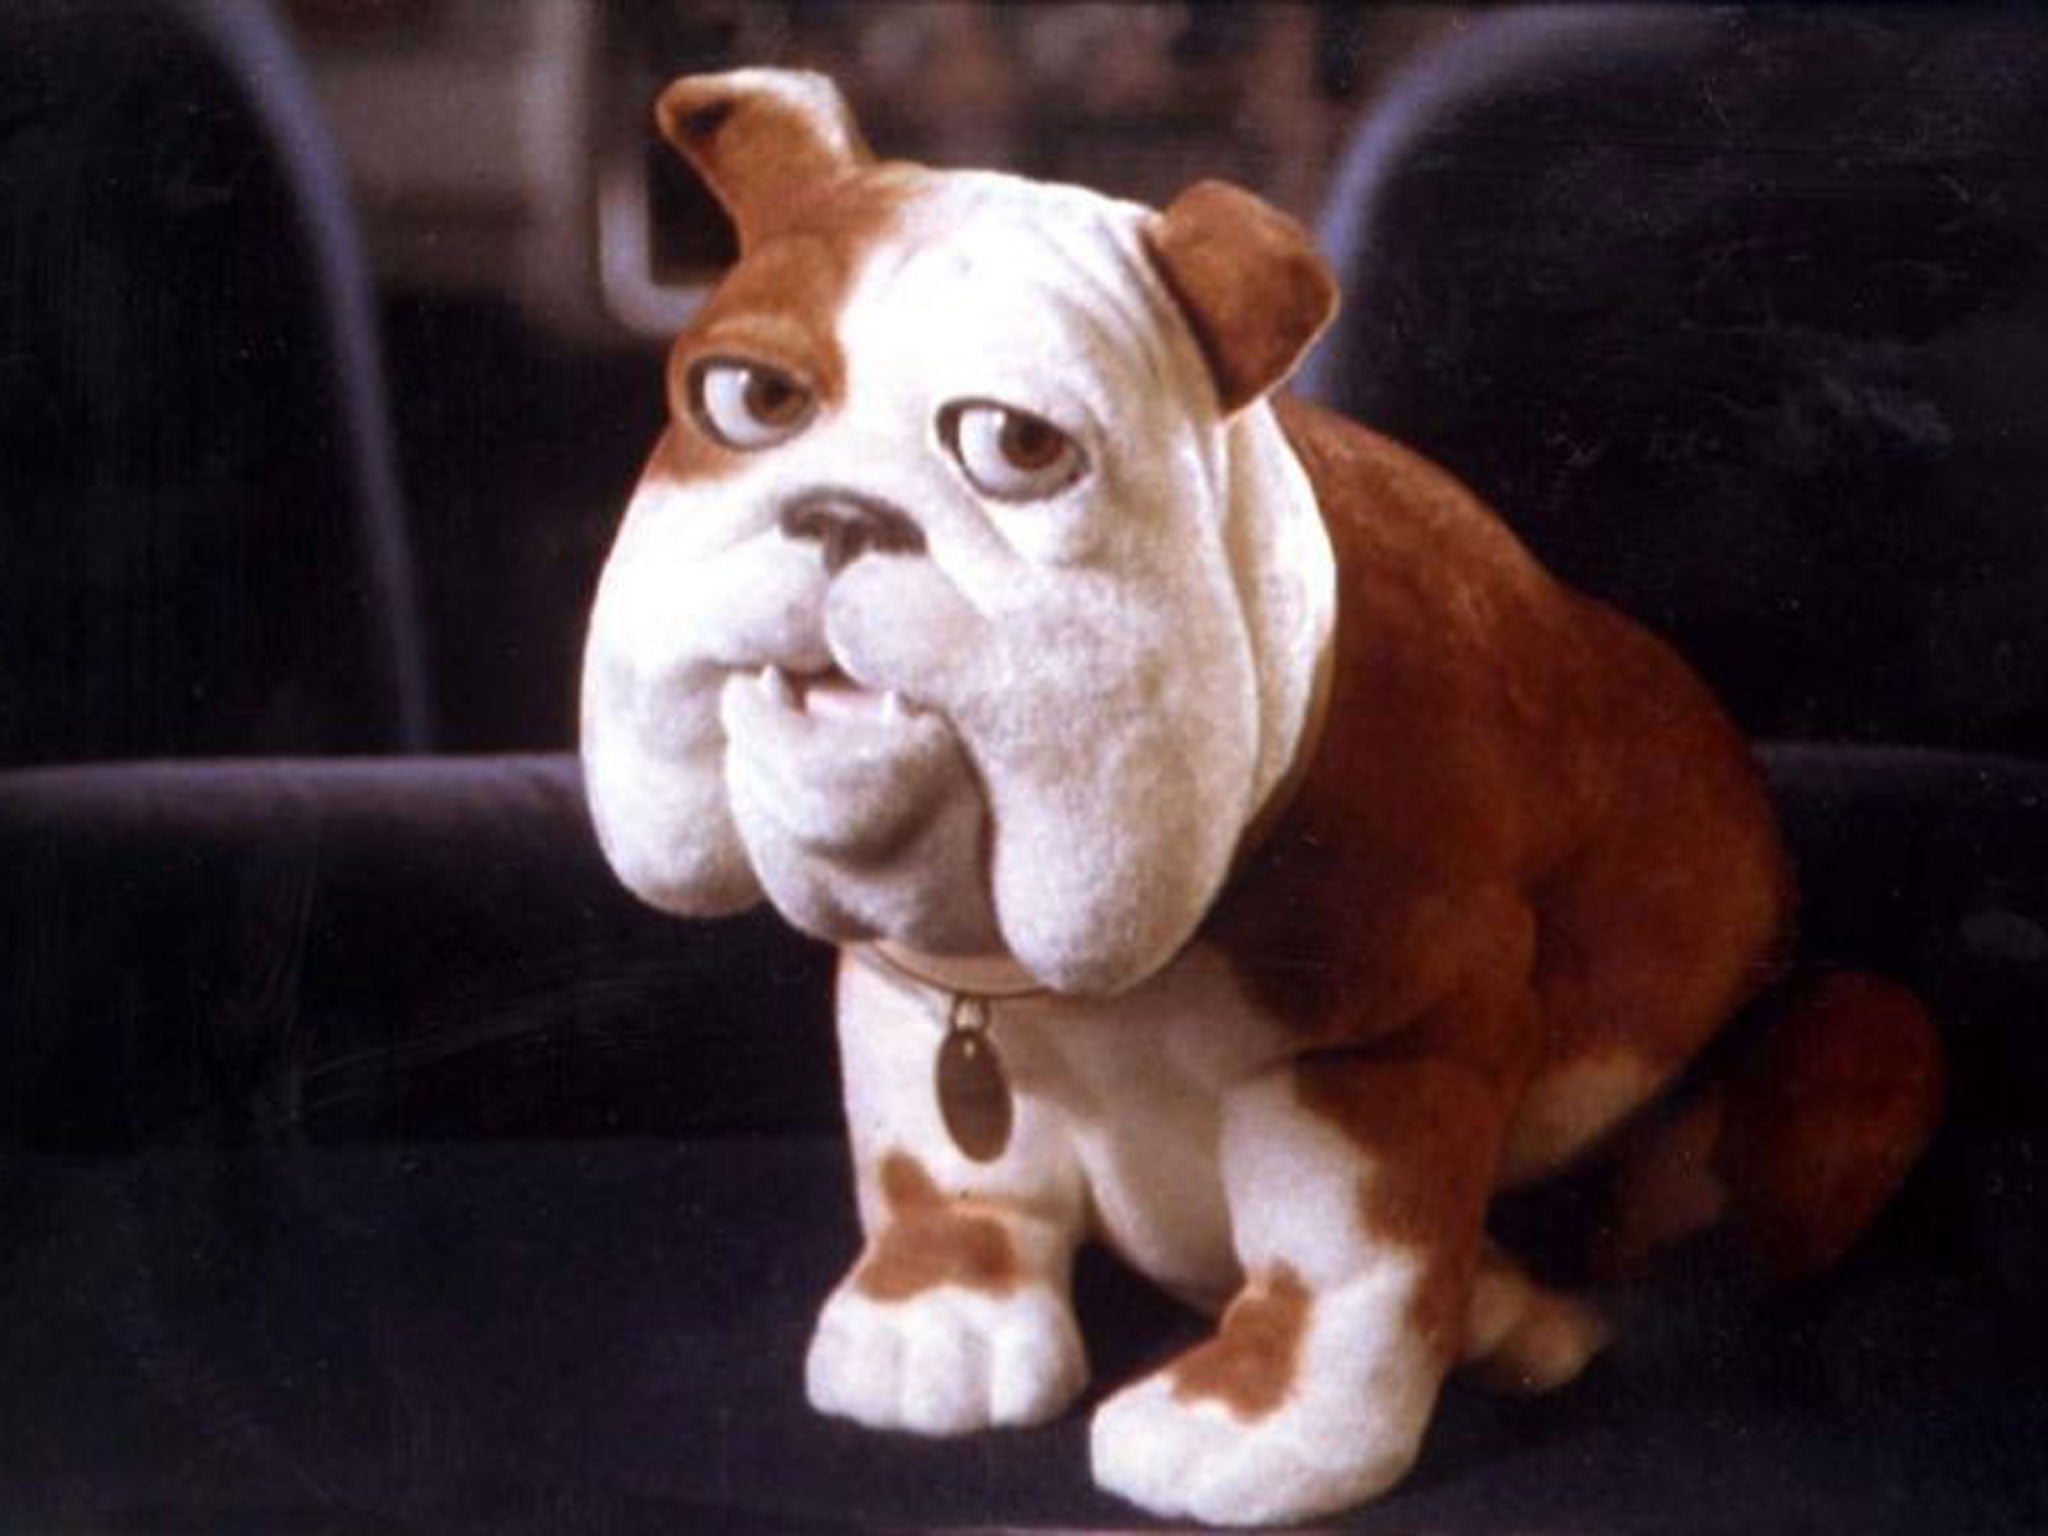 A replica of the Churchill dog could be yours for free